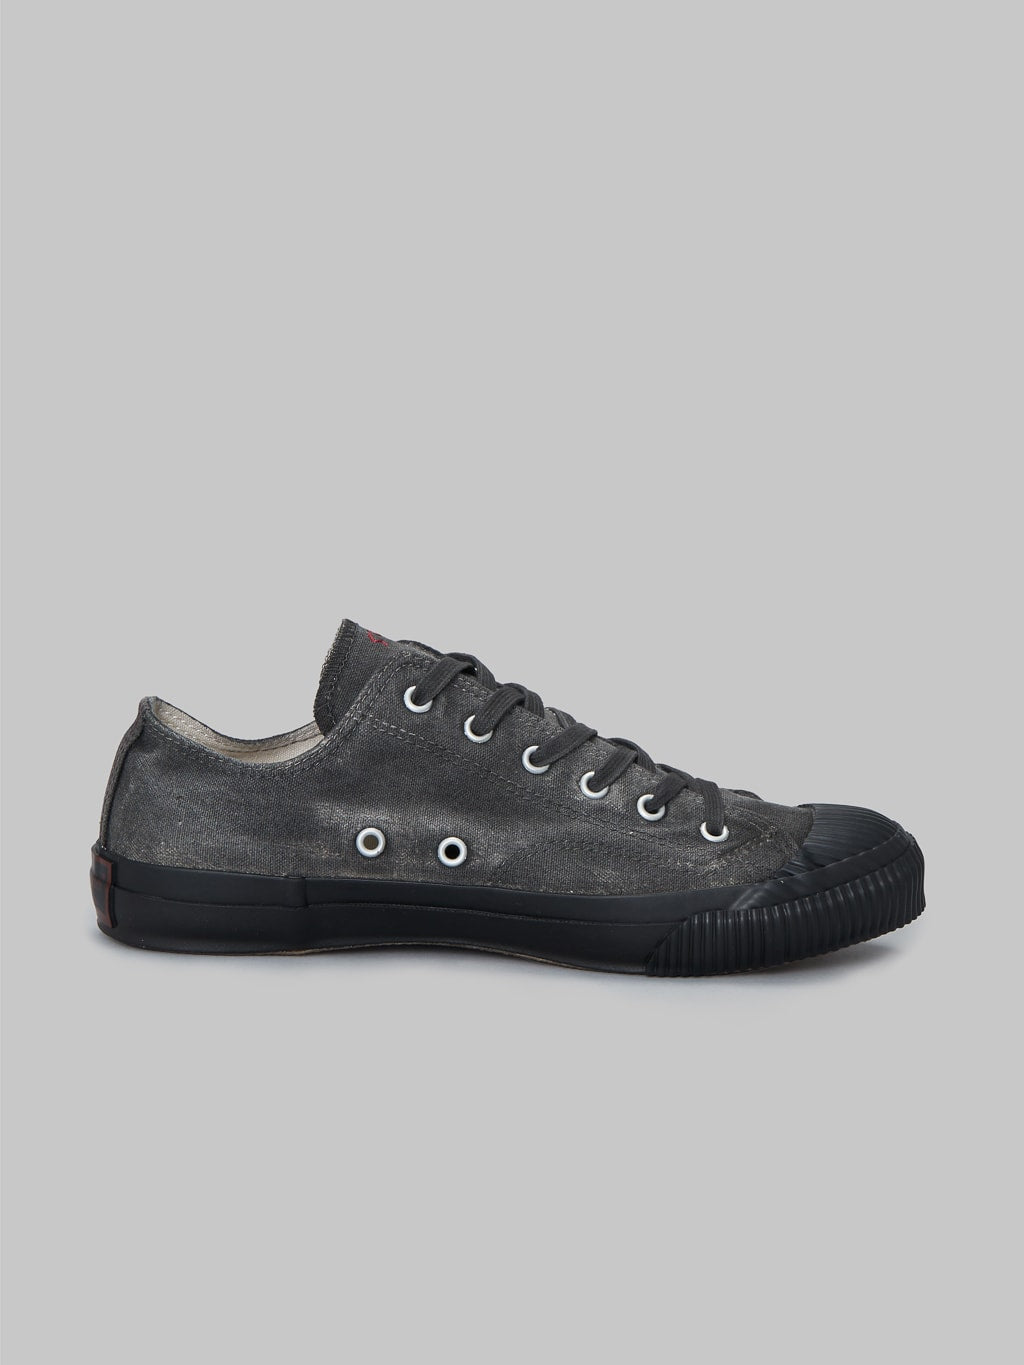 pras low shellcap sumi hand dyed black sneakers ventilation holes